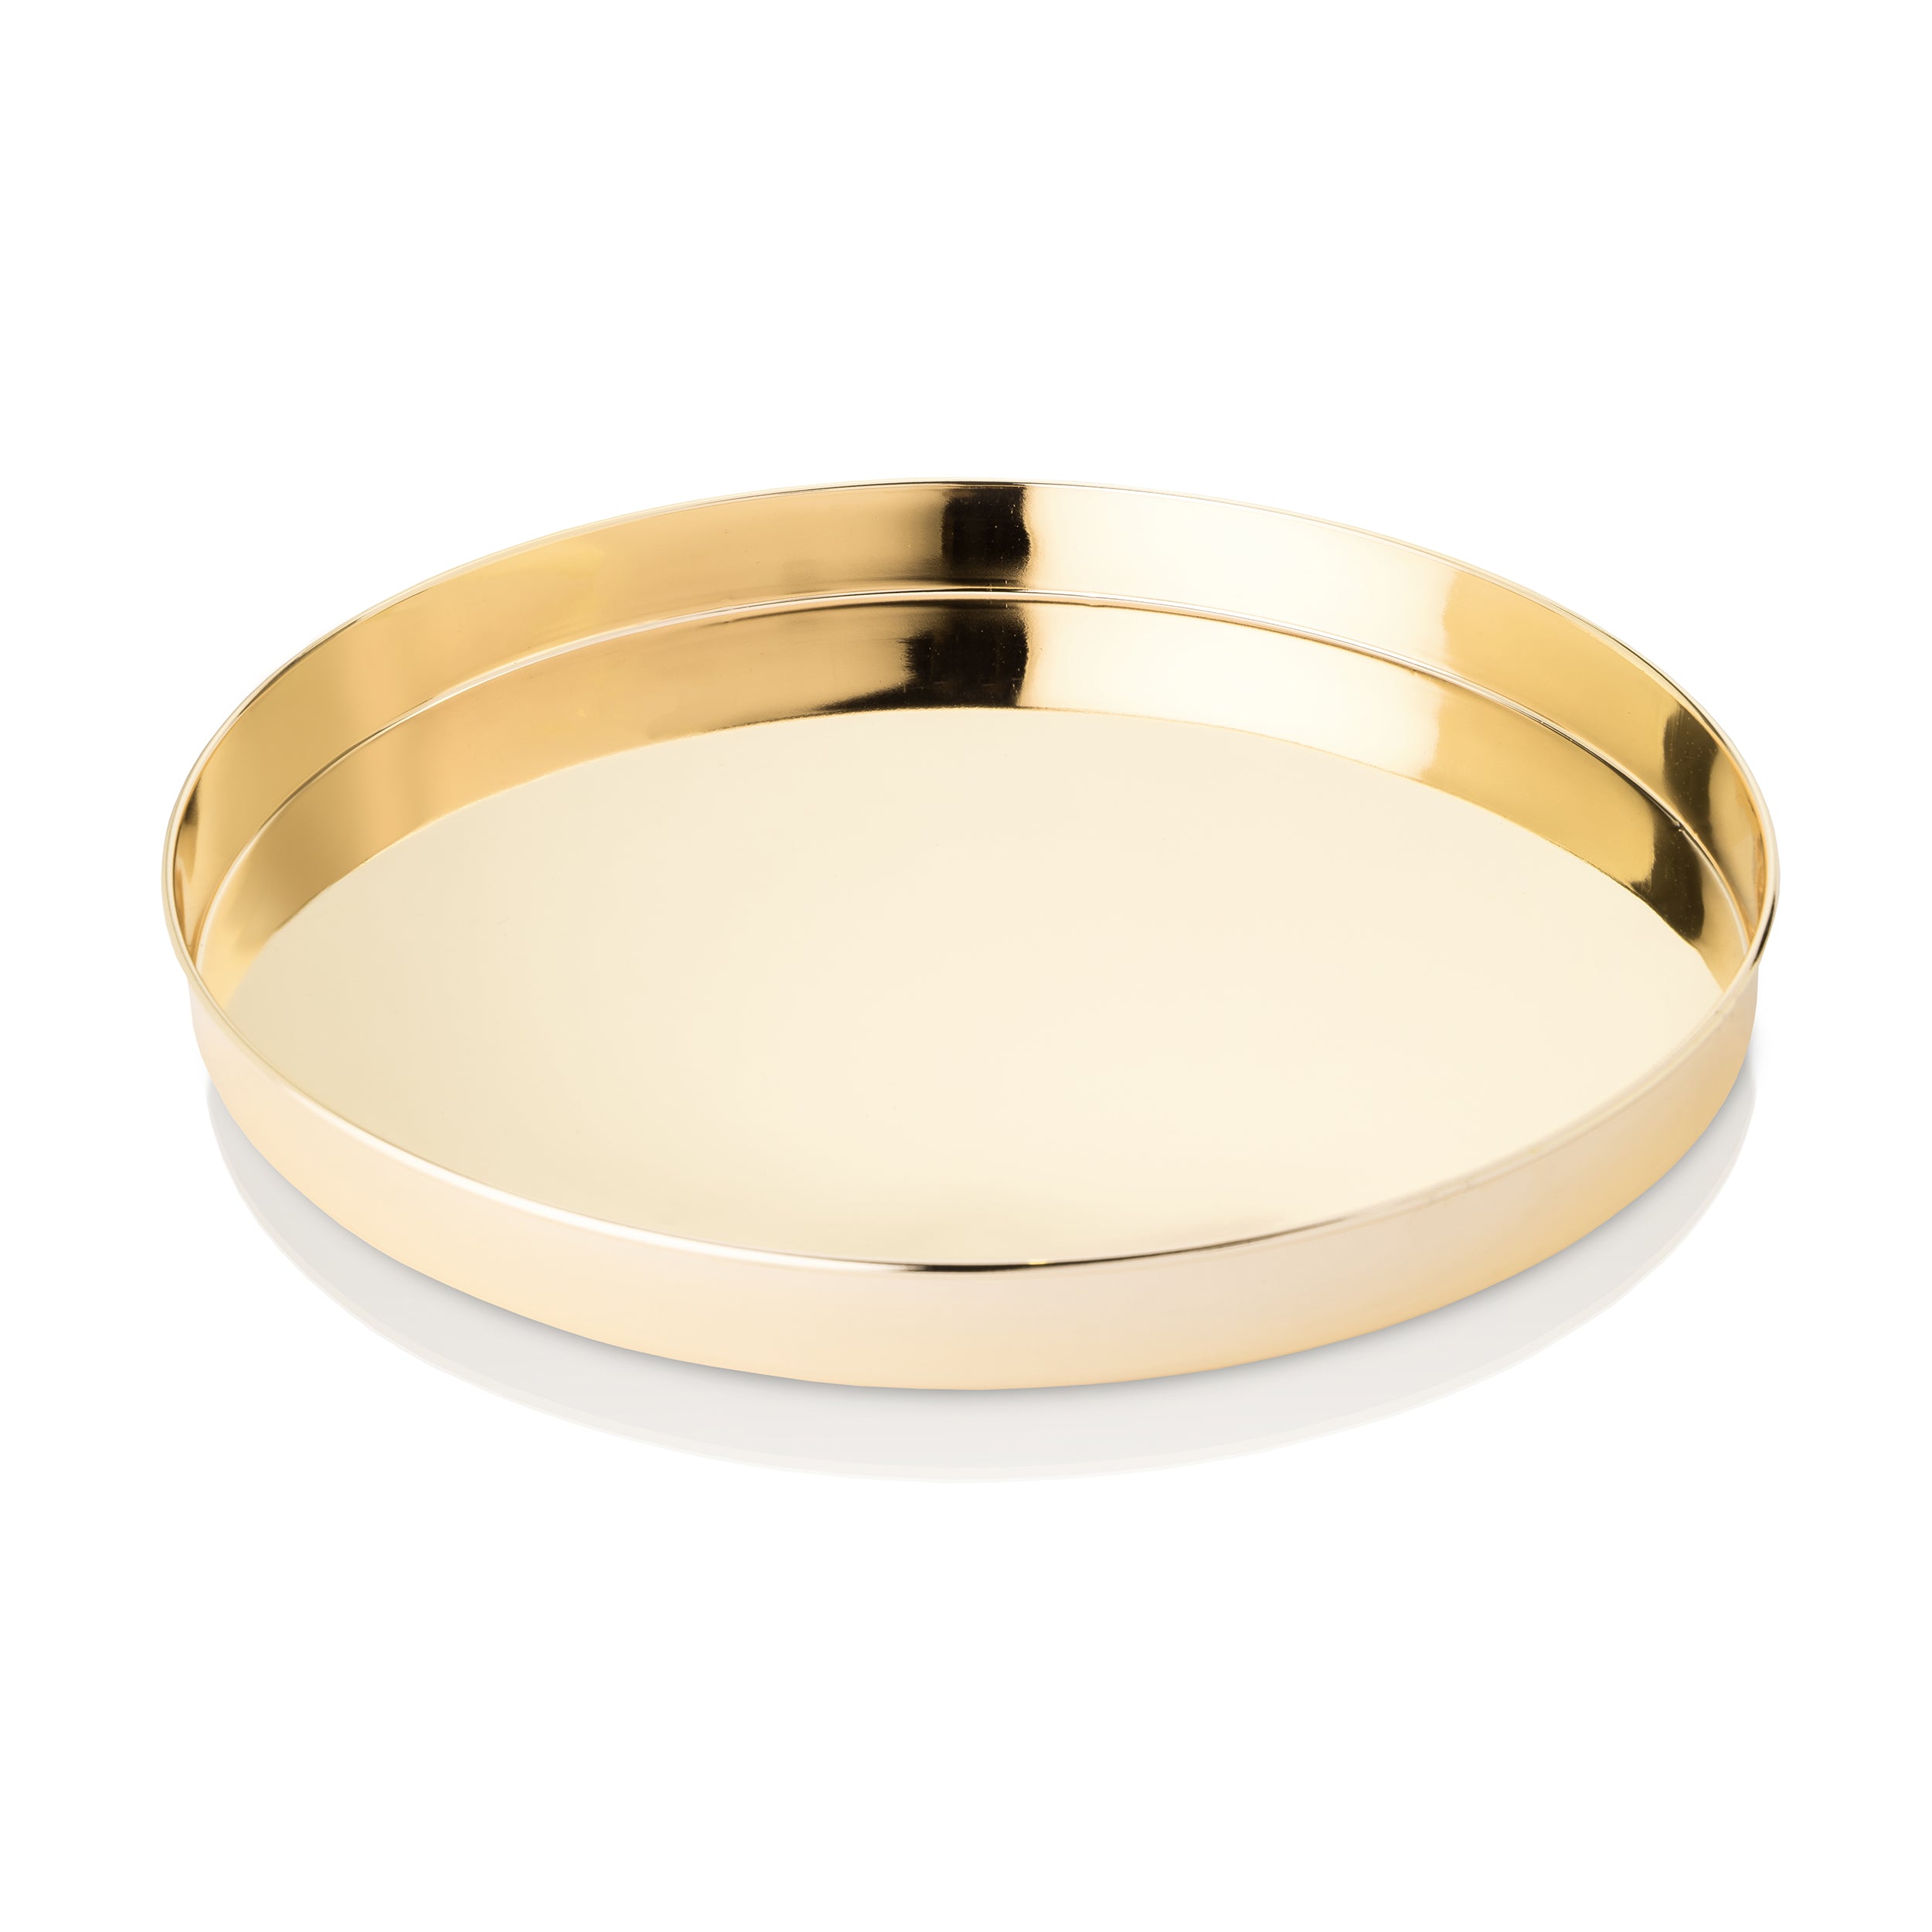 Round Gold Serving Tray 